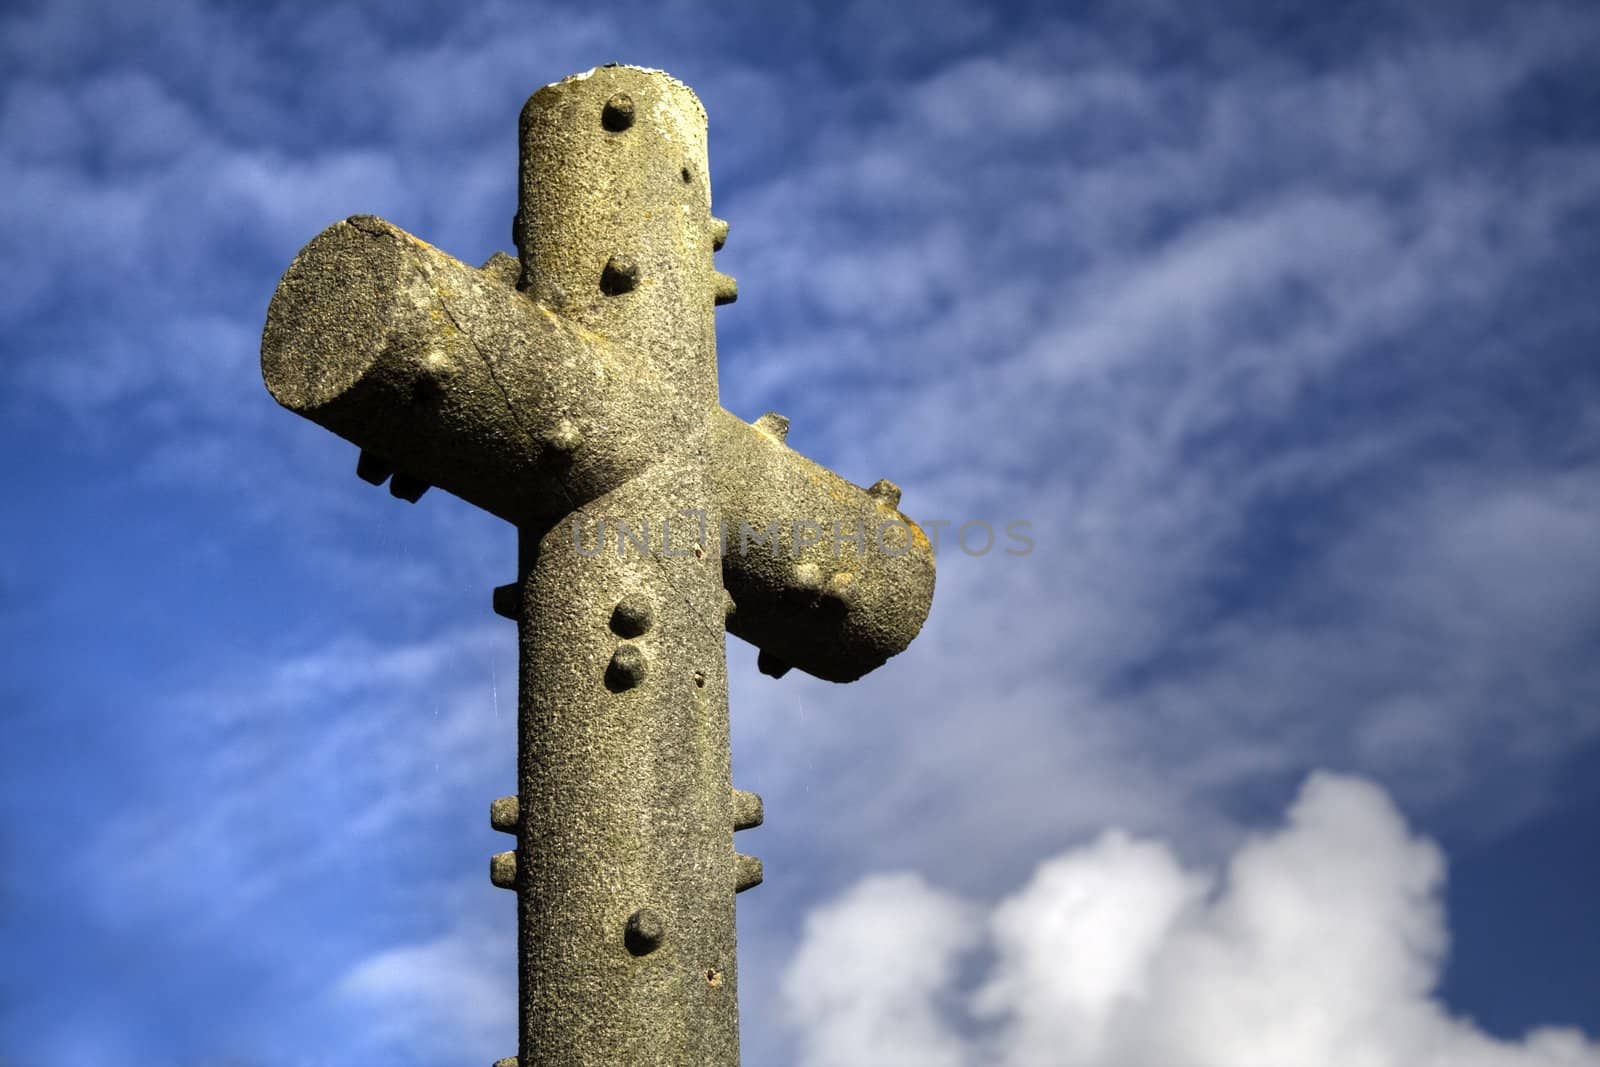 A stone cross in Brittany, France